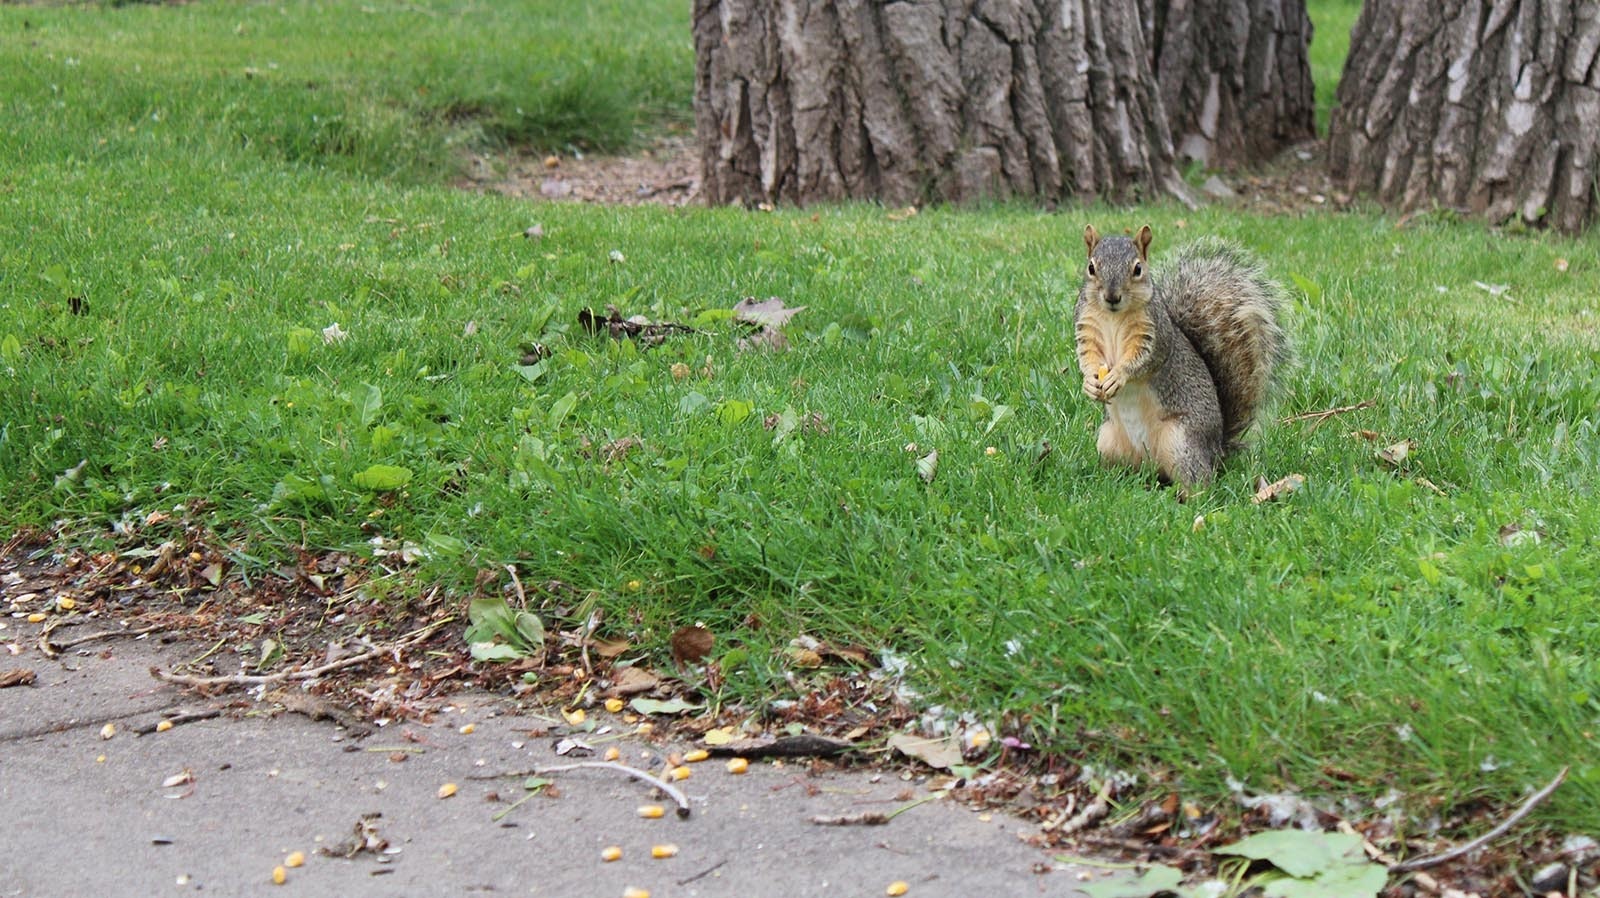 A Holiday Park squirrel takes a break from chowing down on corn.